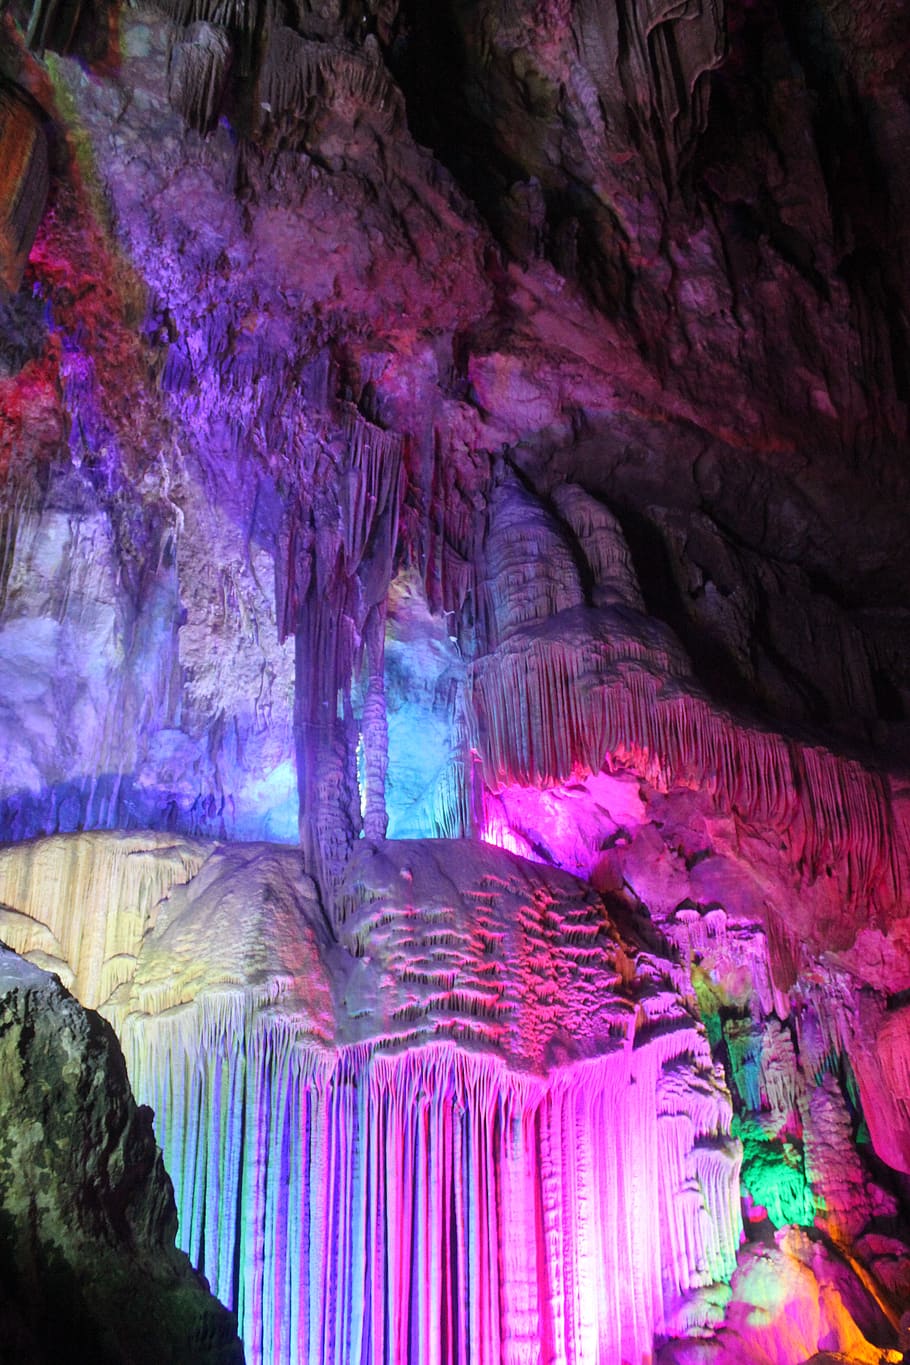 karst cave, karst, cave, rainbow, colors, guilin, china, geology, rock, rock formation